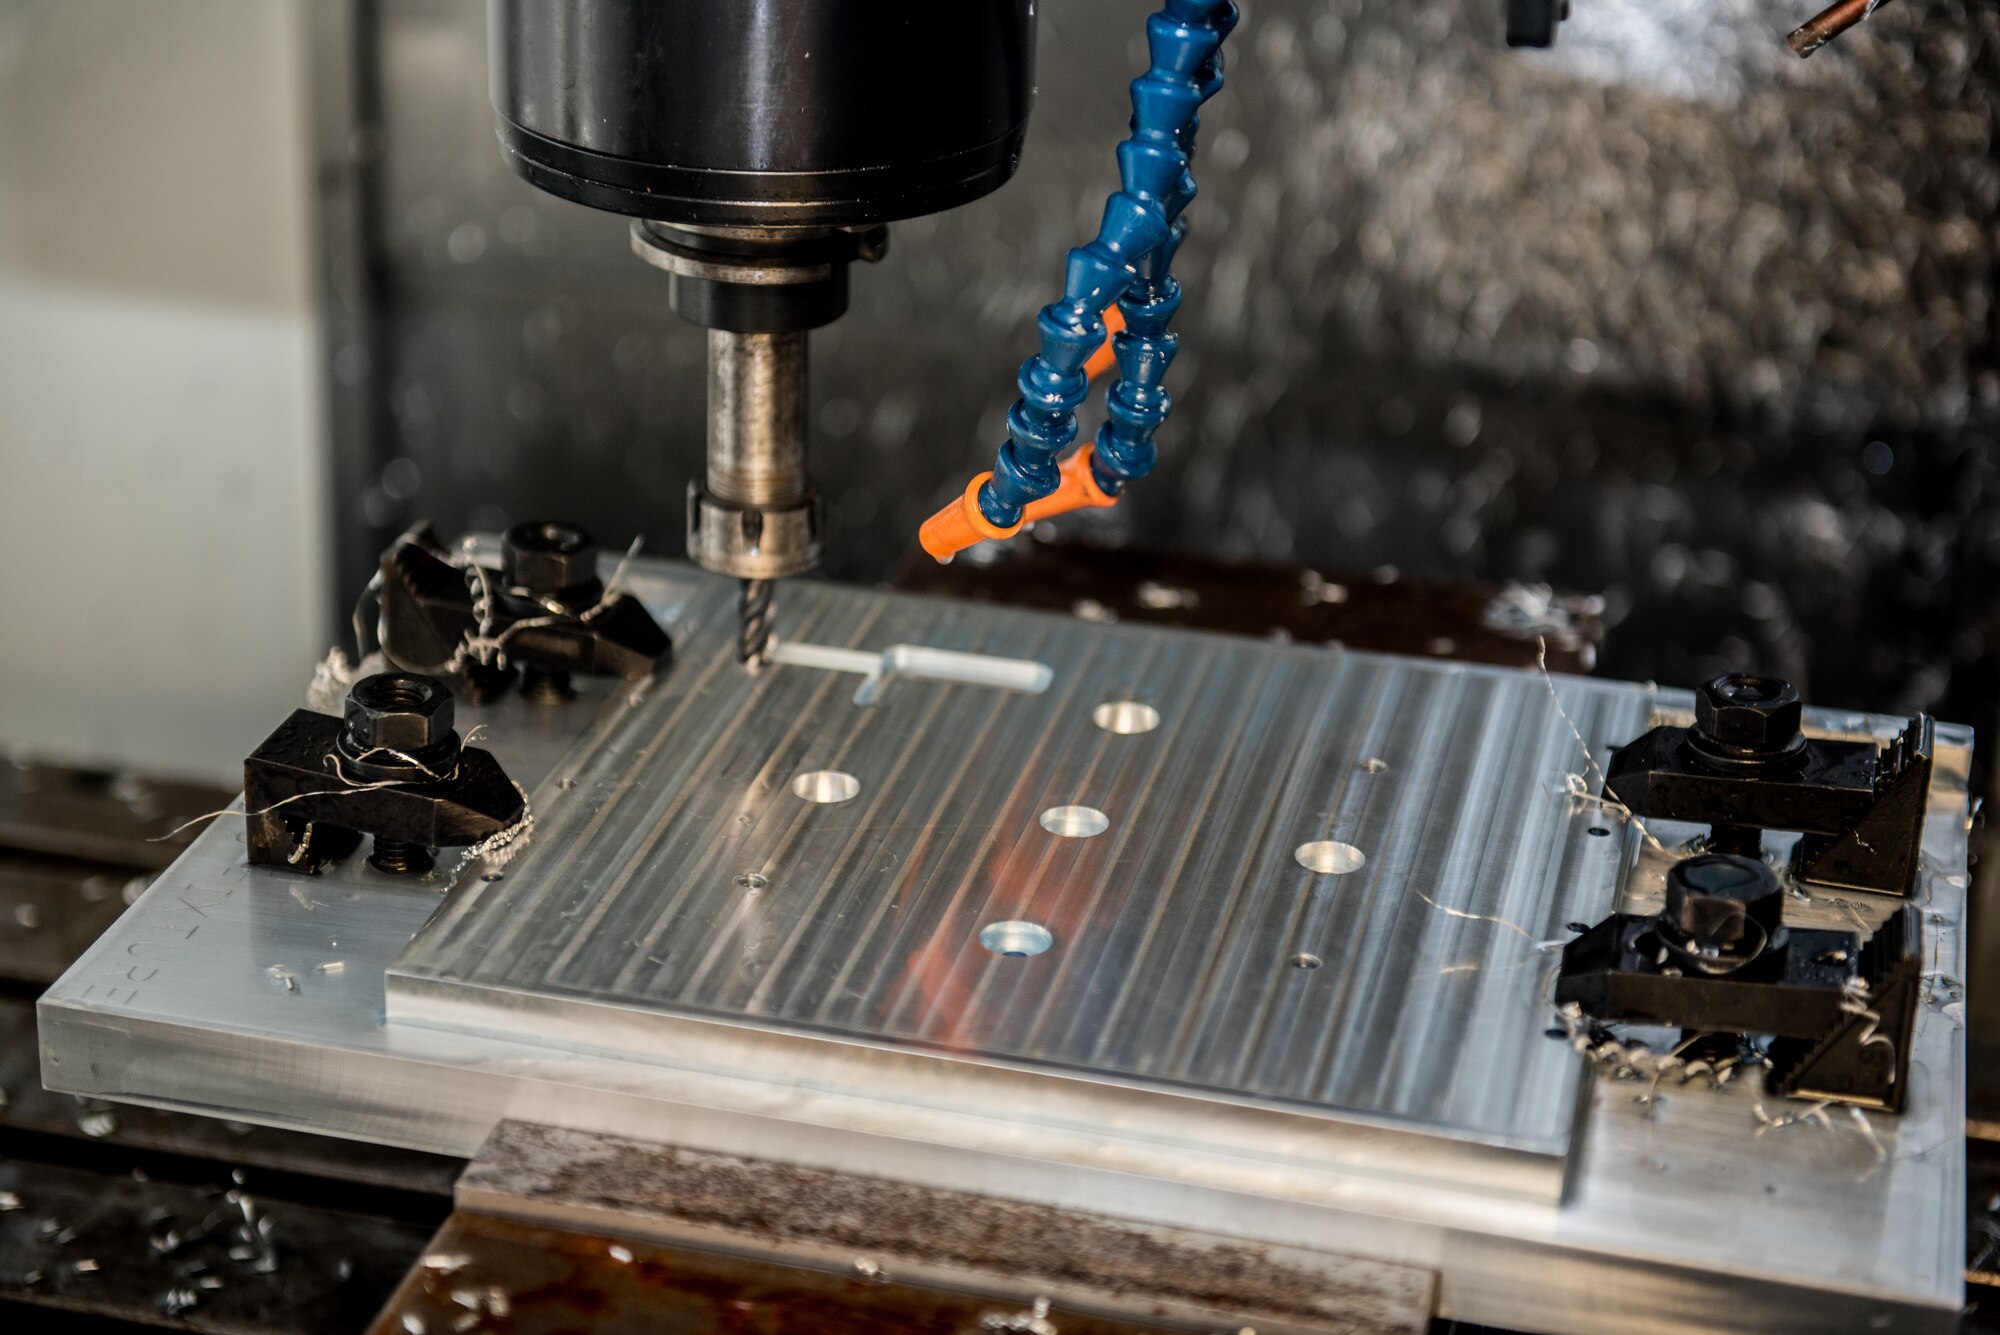 A vertical mill computer numeric control system drills into an aluminum plate at Dover Air Force Base, Delaware, Jan. 6, 2019. The 512th Airlift Wing volunteered to manufacture HH-60G Pave Hawk helicopter plates to assist the 920th Rescue Wing at Patrick AFB, Florida. (U.S. Air Force photo by Staff Sgt. Damien Taylor)